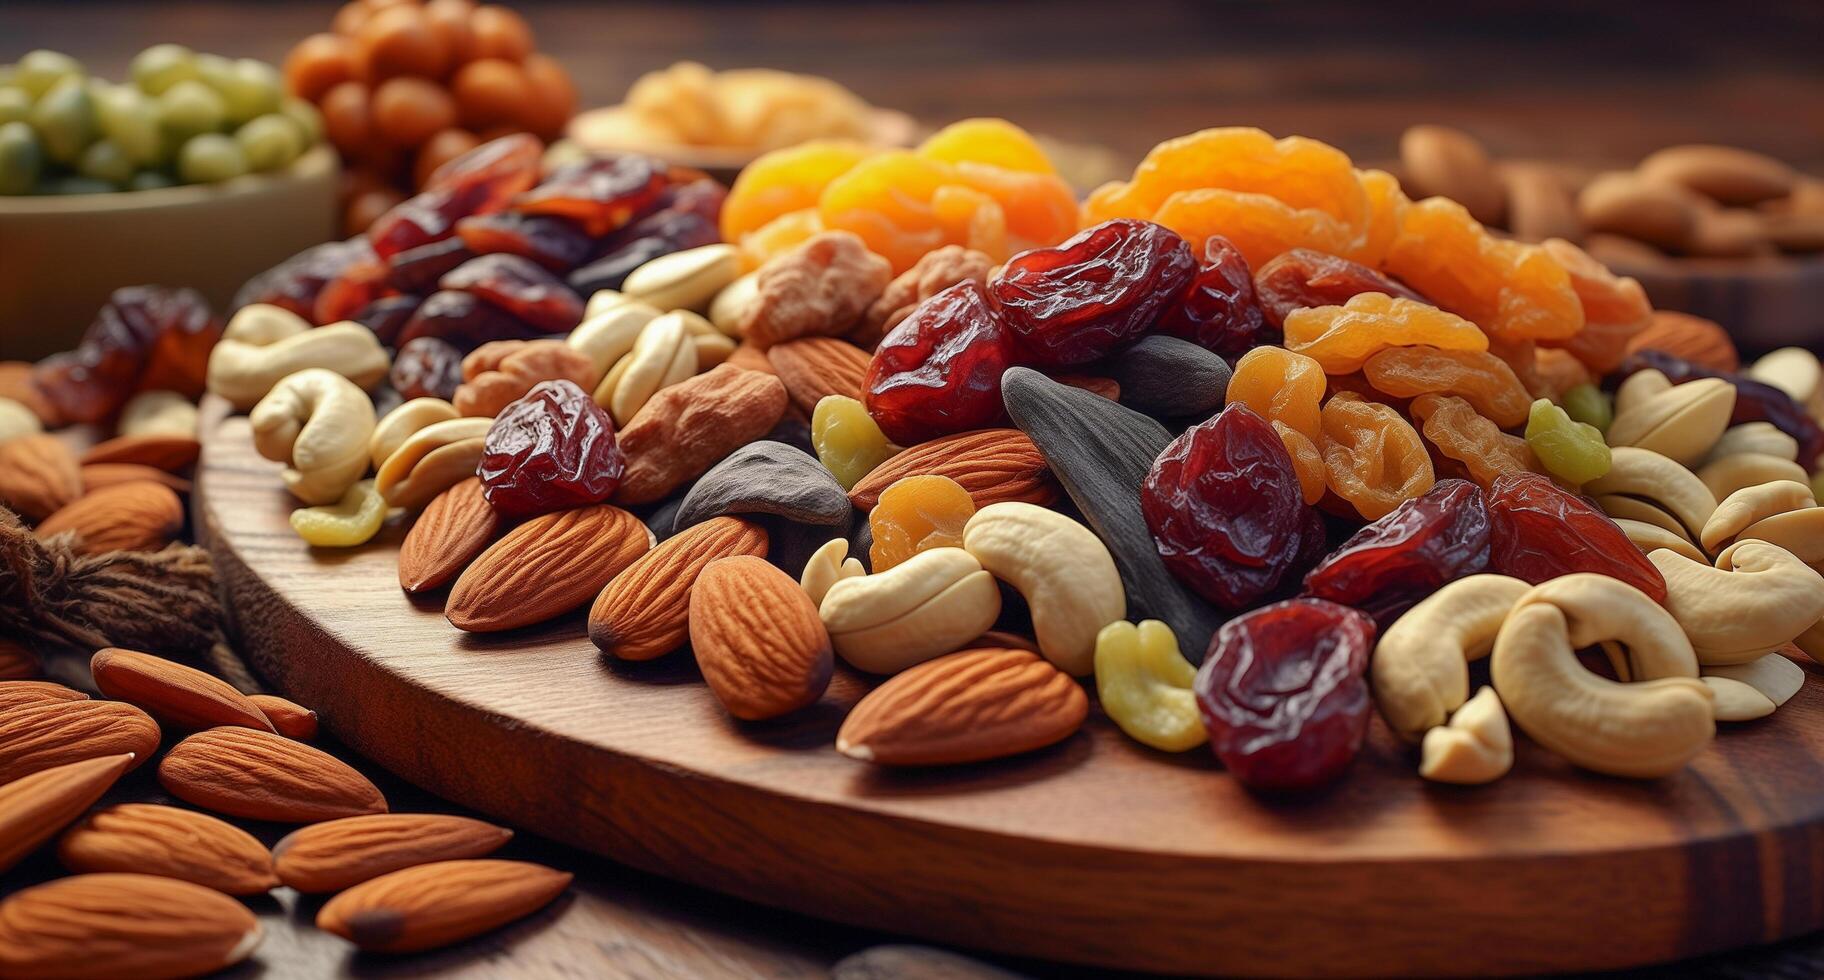 Nuts and dried fruits, close-up photo